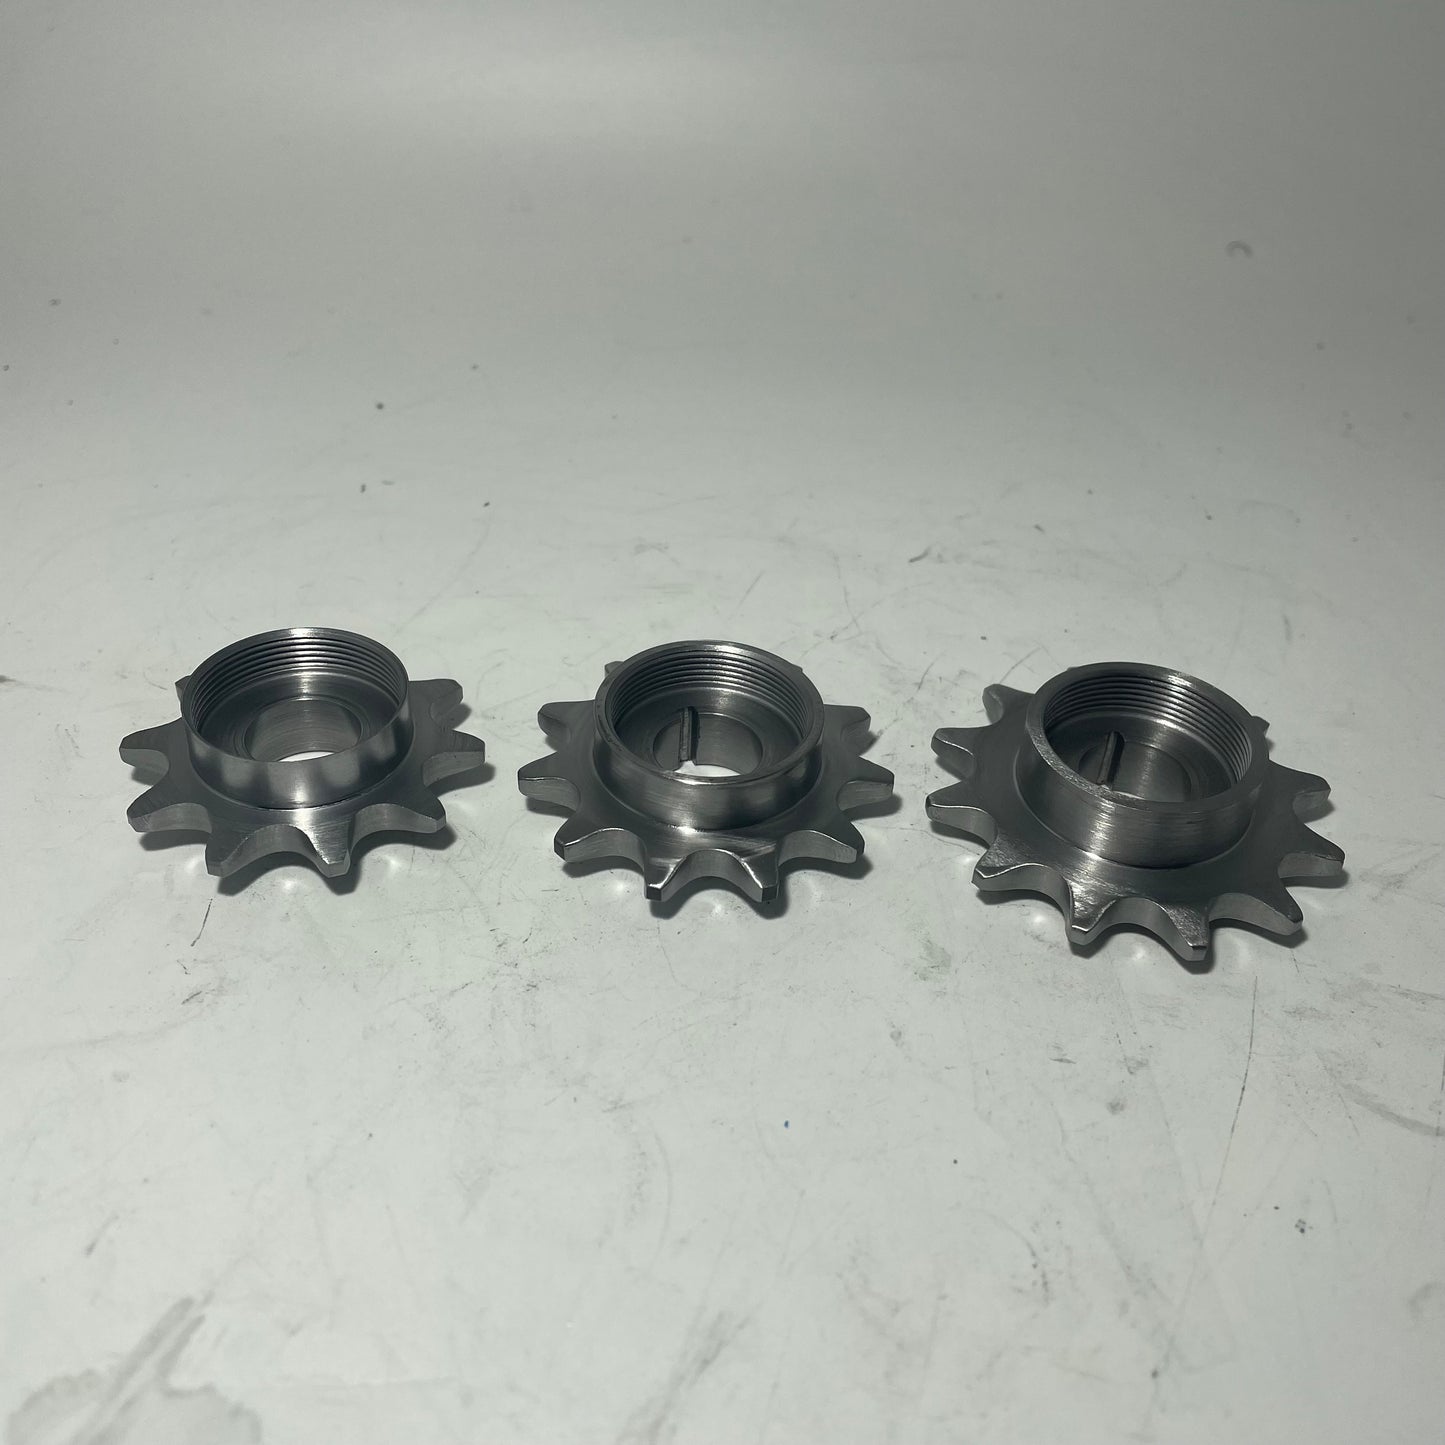 Offset Drive sprocket 10/11/12 tooth